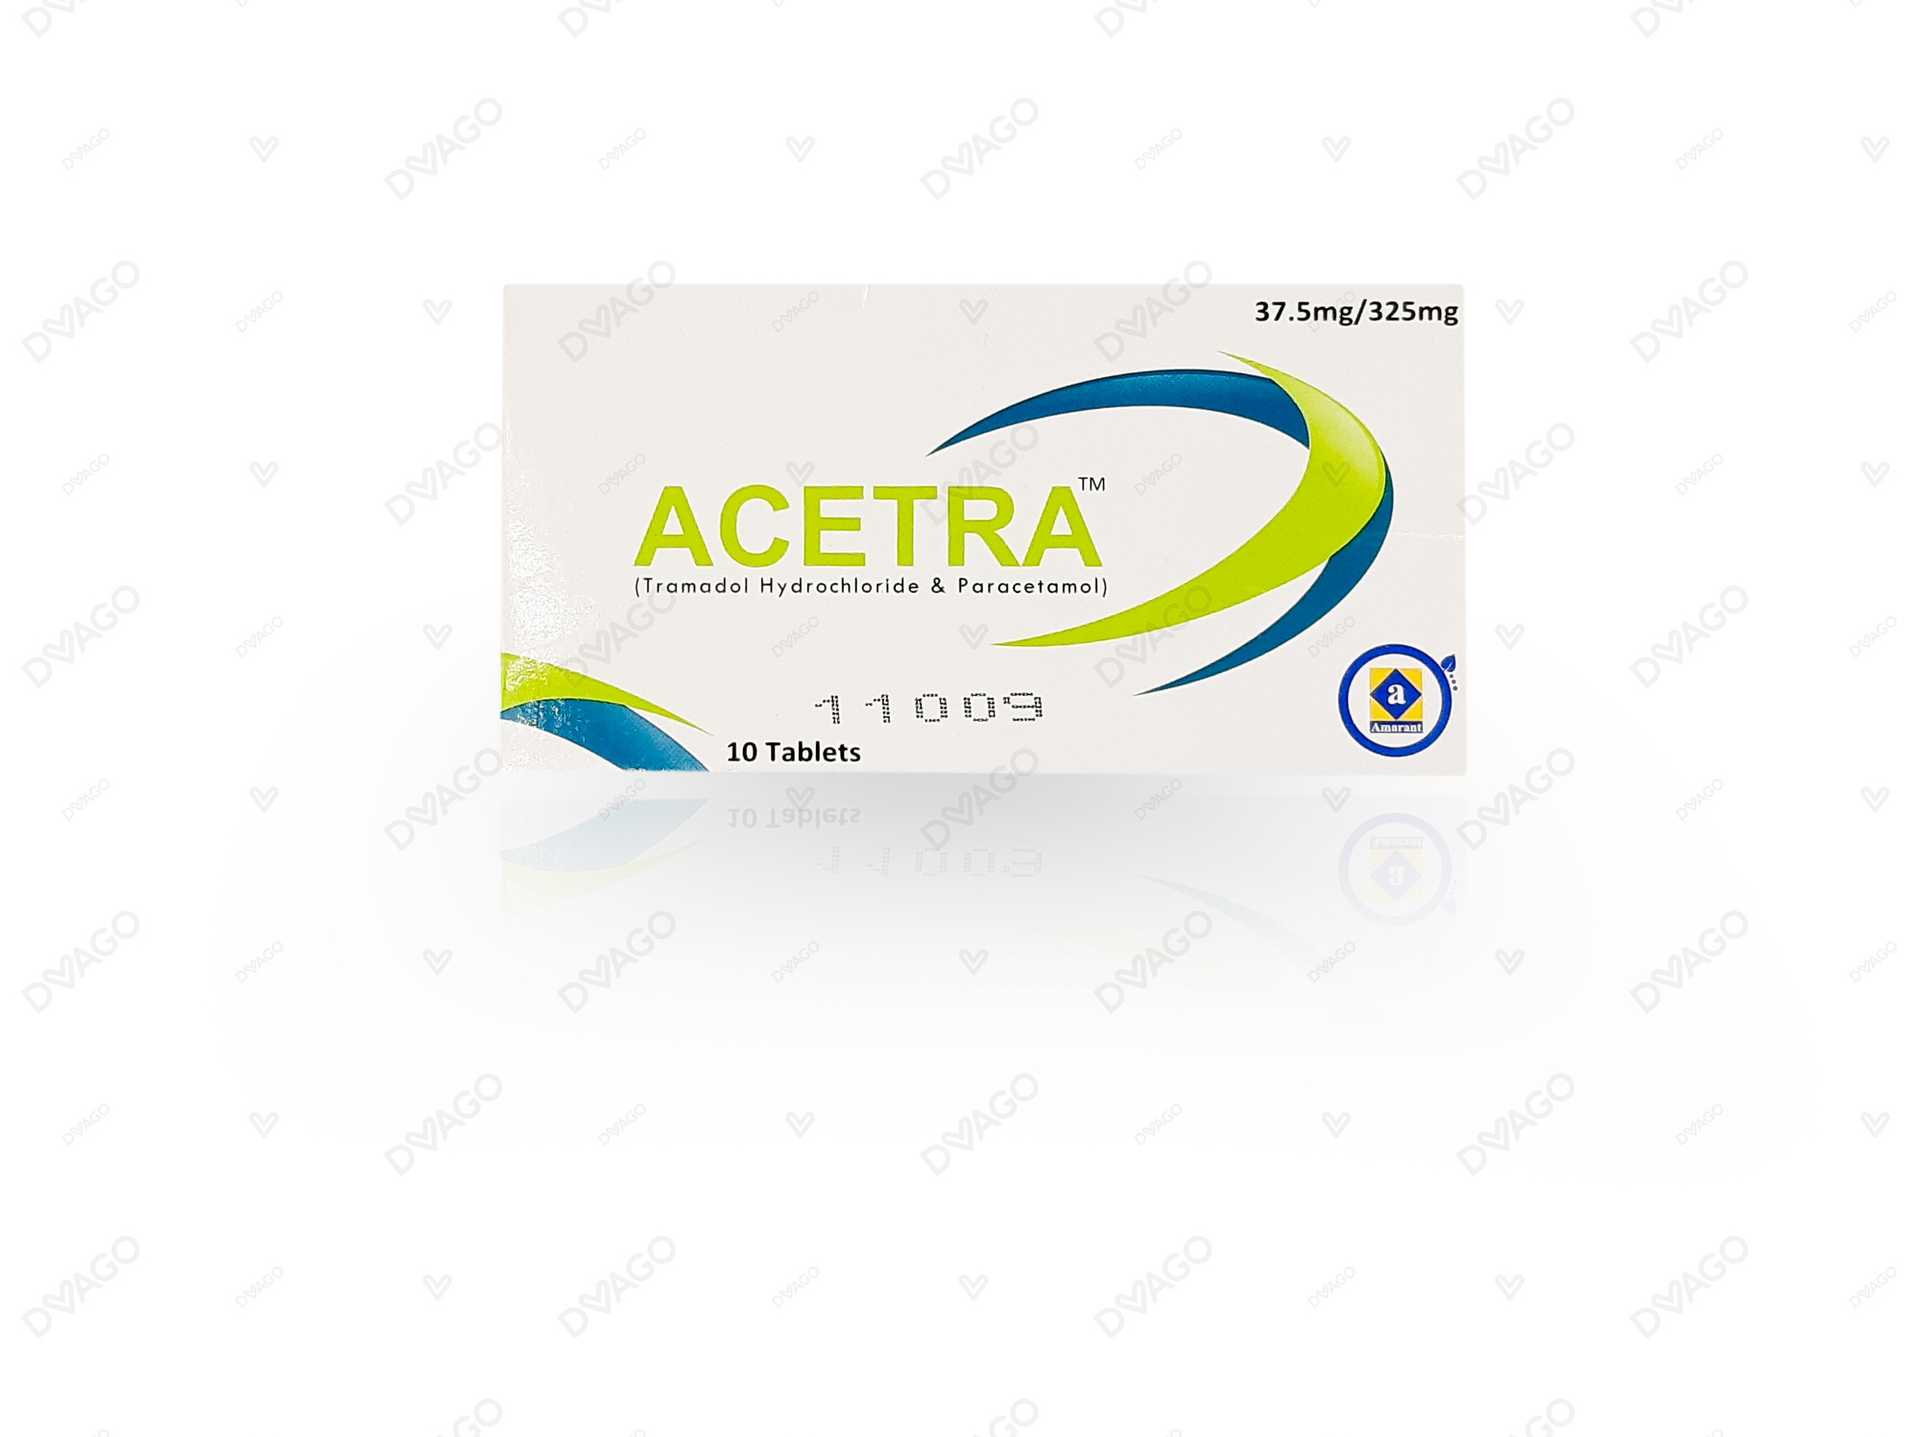 acetra tablets 37.5mg/325mg